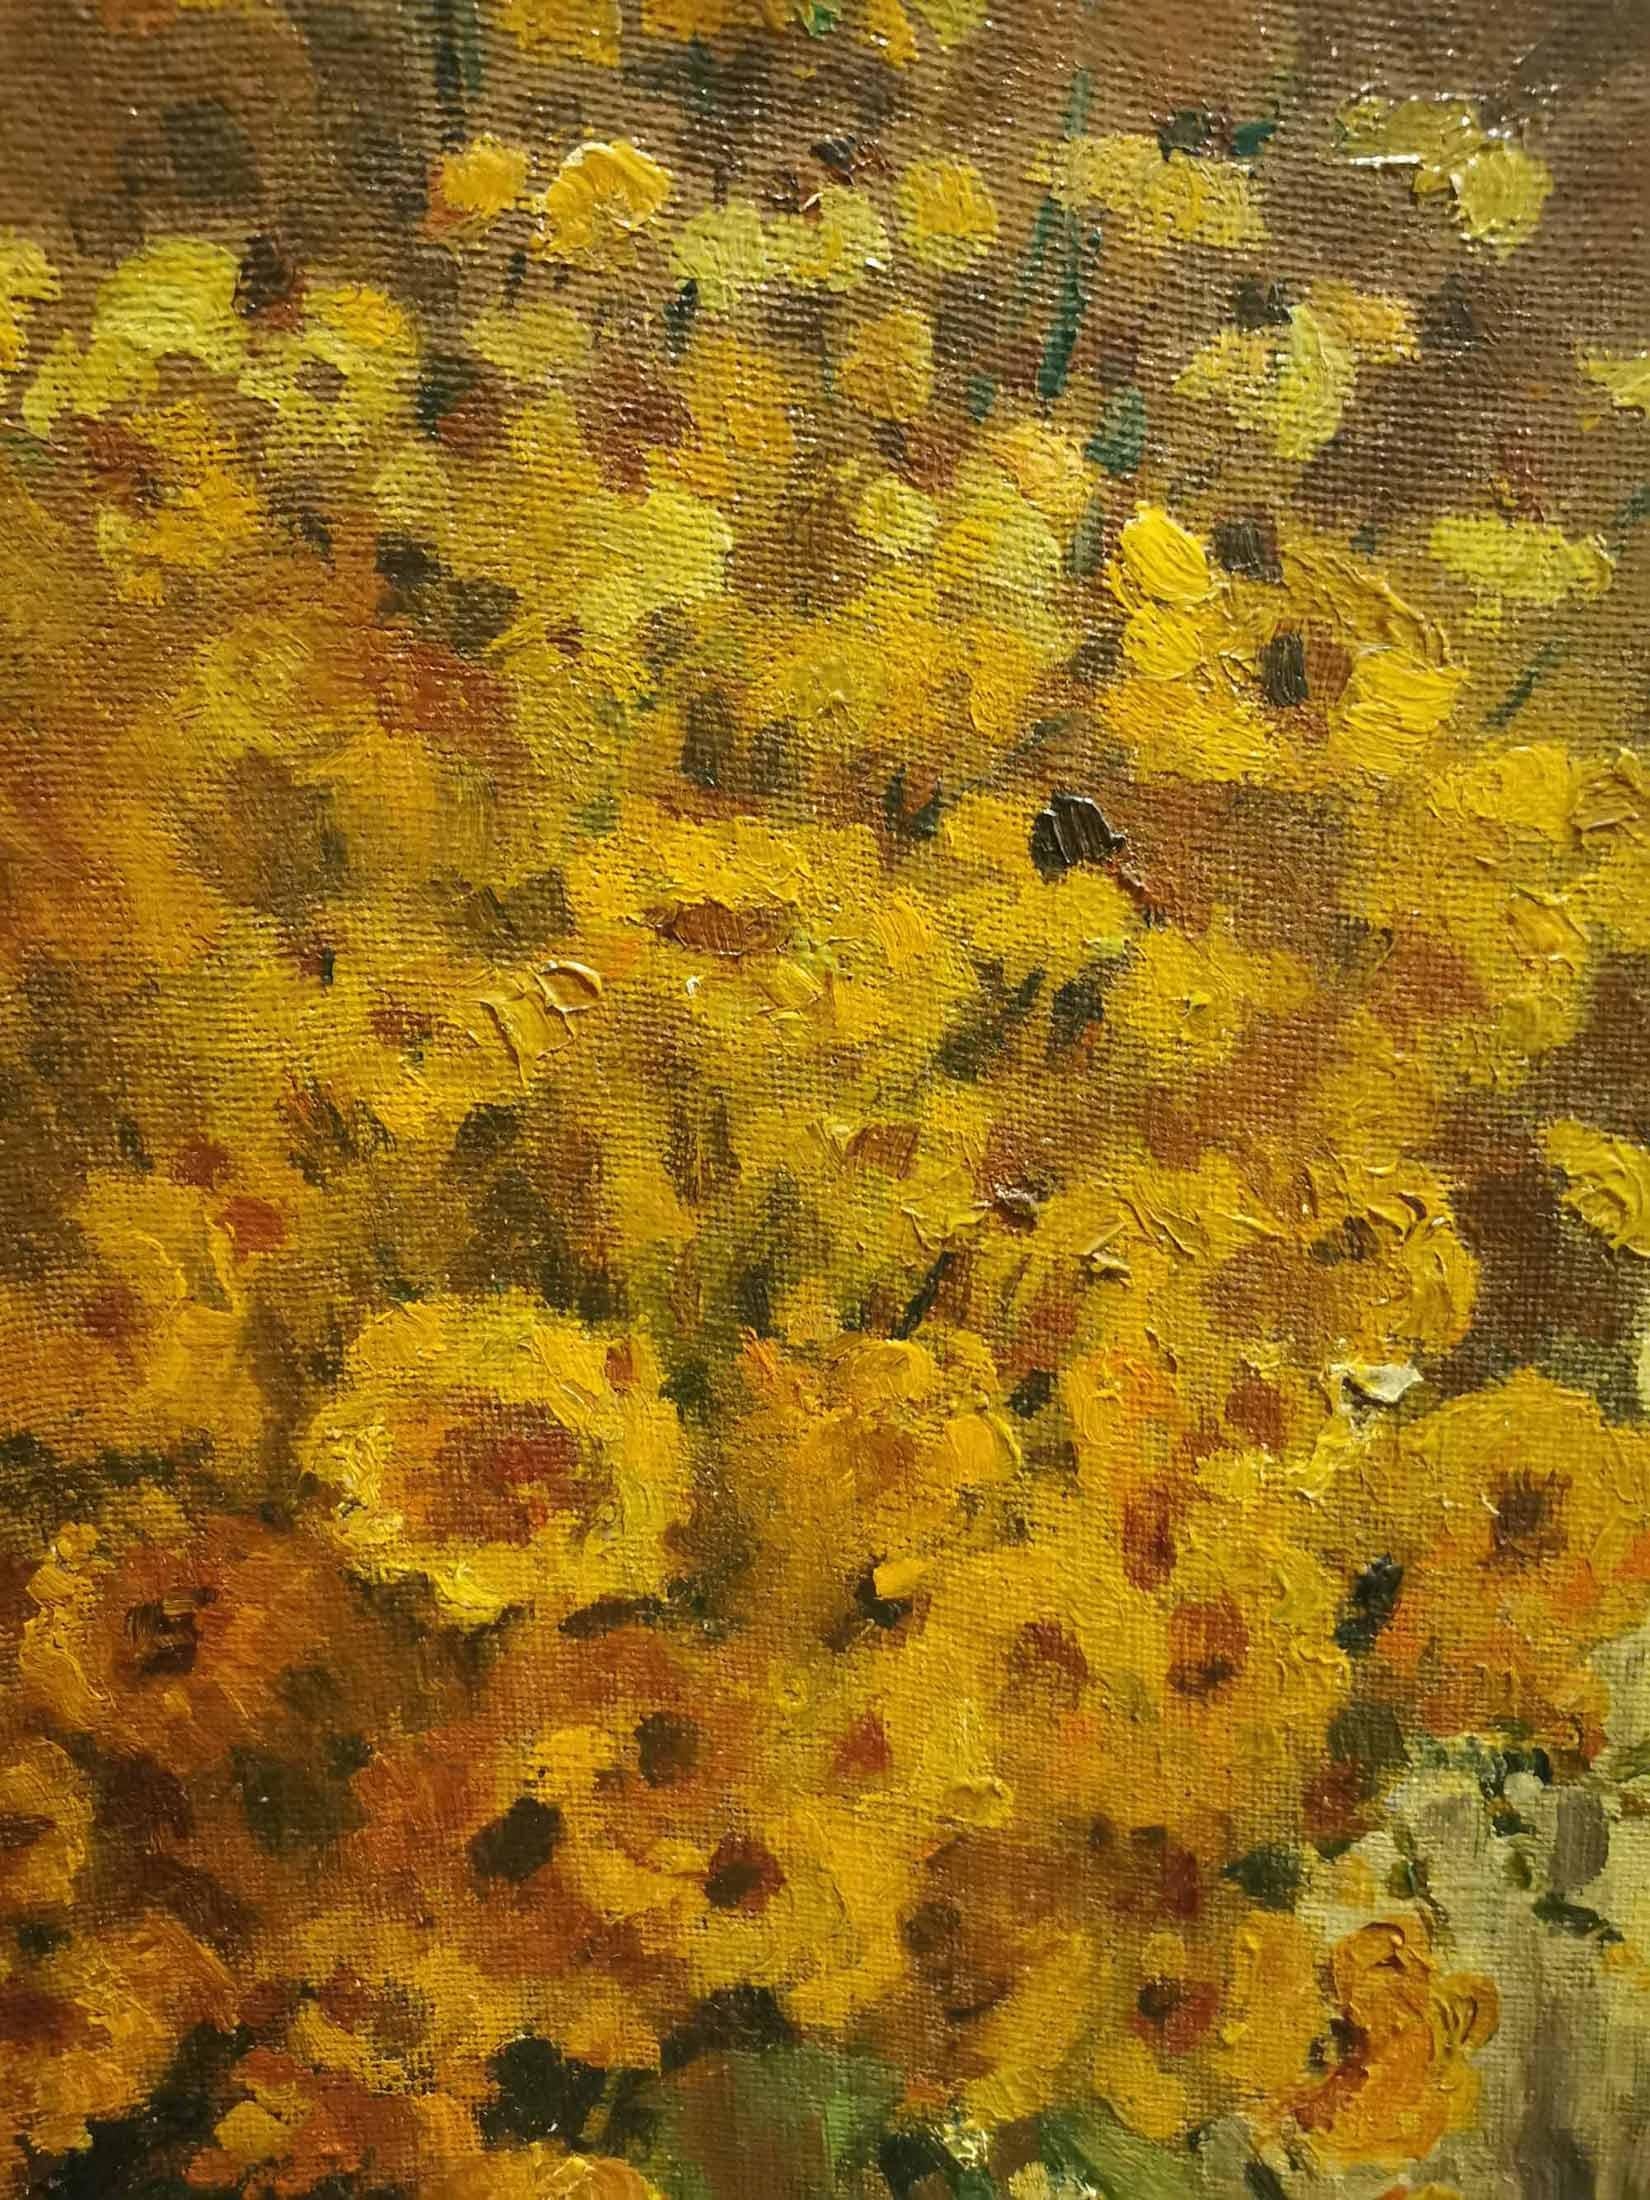 Painting with yellow field daisies and statuette

Measures: 70 x 50 frame not included
88 x 68 with frame

Hans Geissel - floral composition
A rich bouquet of field daisies, with an intense yellow color, is contained in a green glass vase,